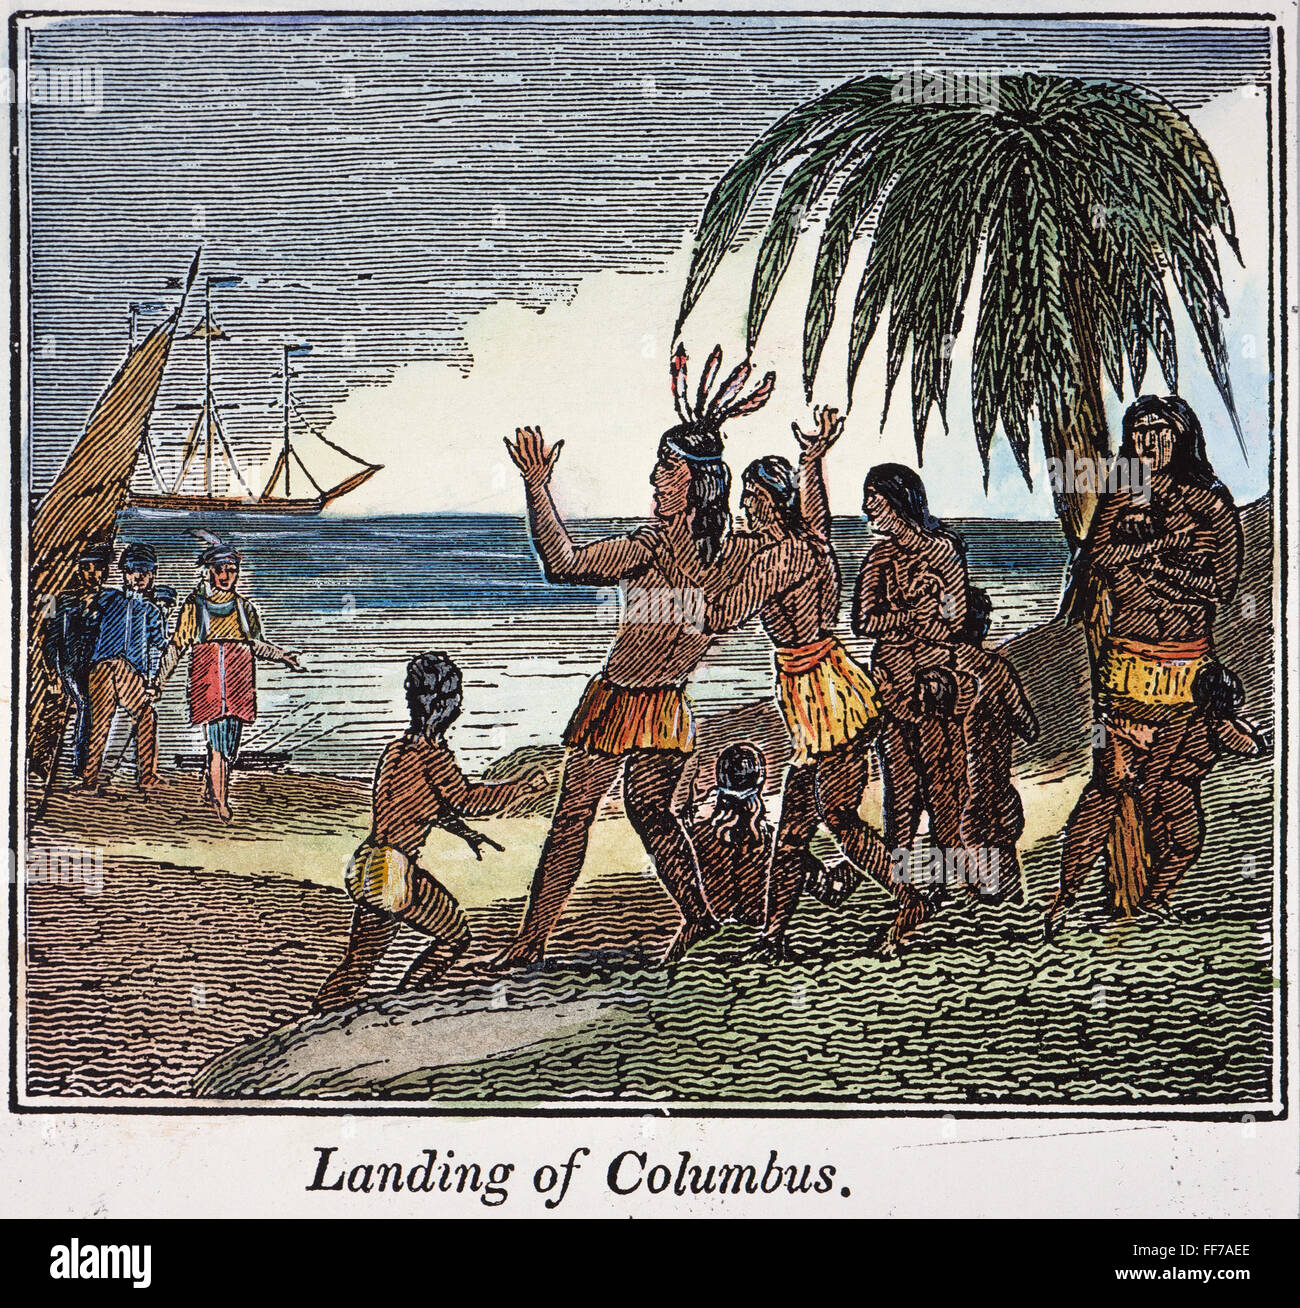 COLUMBUS: NEW WORLD, 1492. /nThe landing of Christopher Columbus in the New World: engraving, early 19th century. Stock Photo